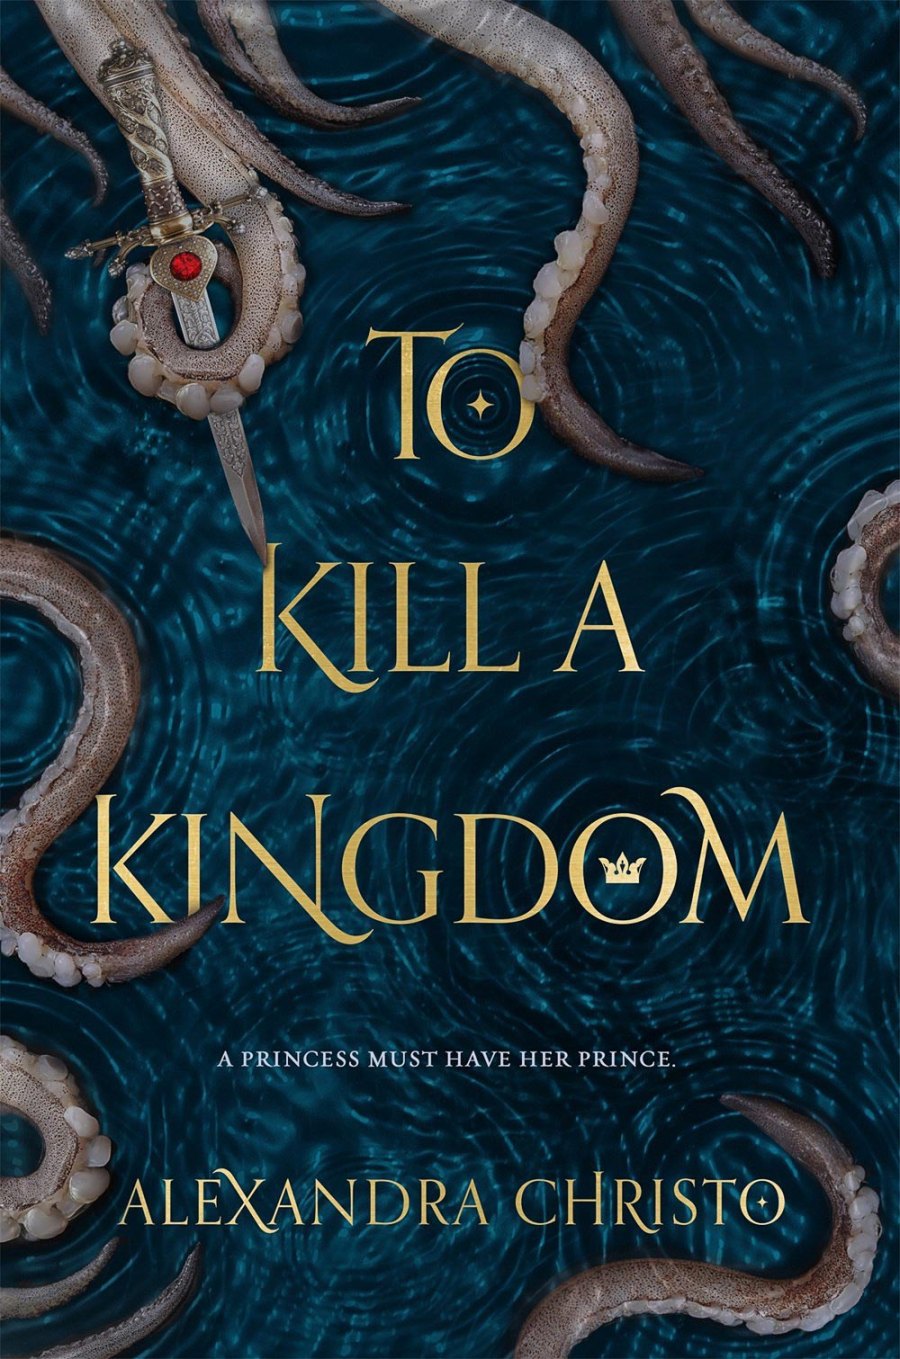 If You re a Fan of Sarah J Maas You Need to Read These Romantasy Books ASAP To Kill a Kingdom by Alexandra Christo 065